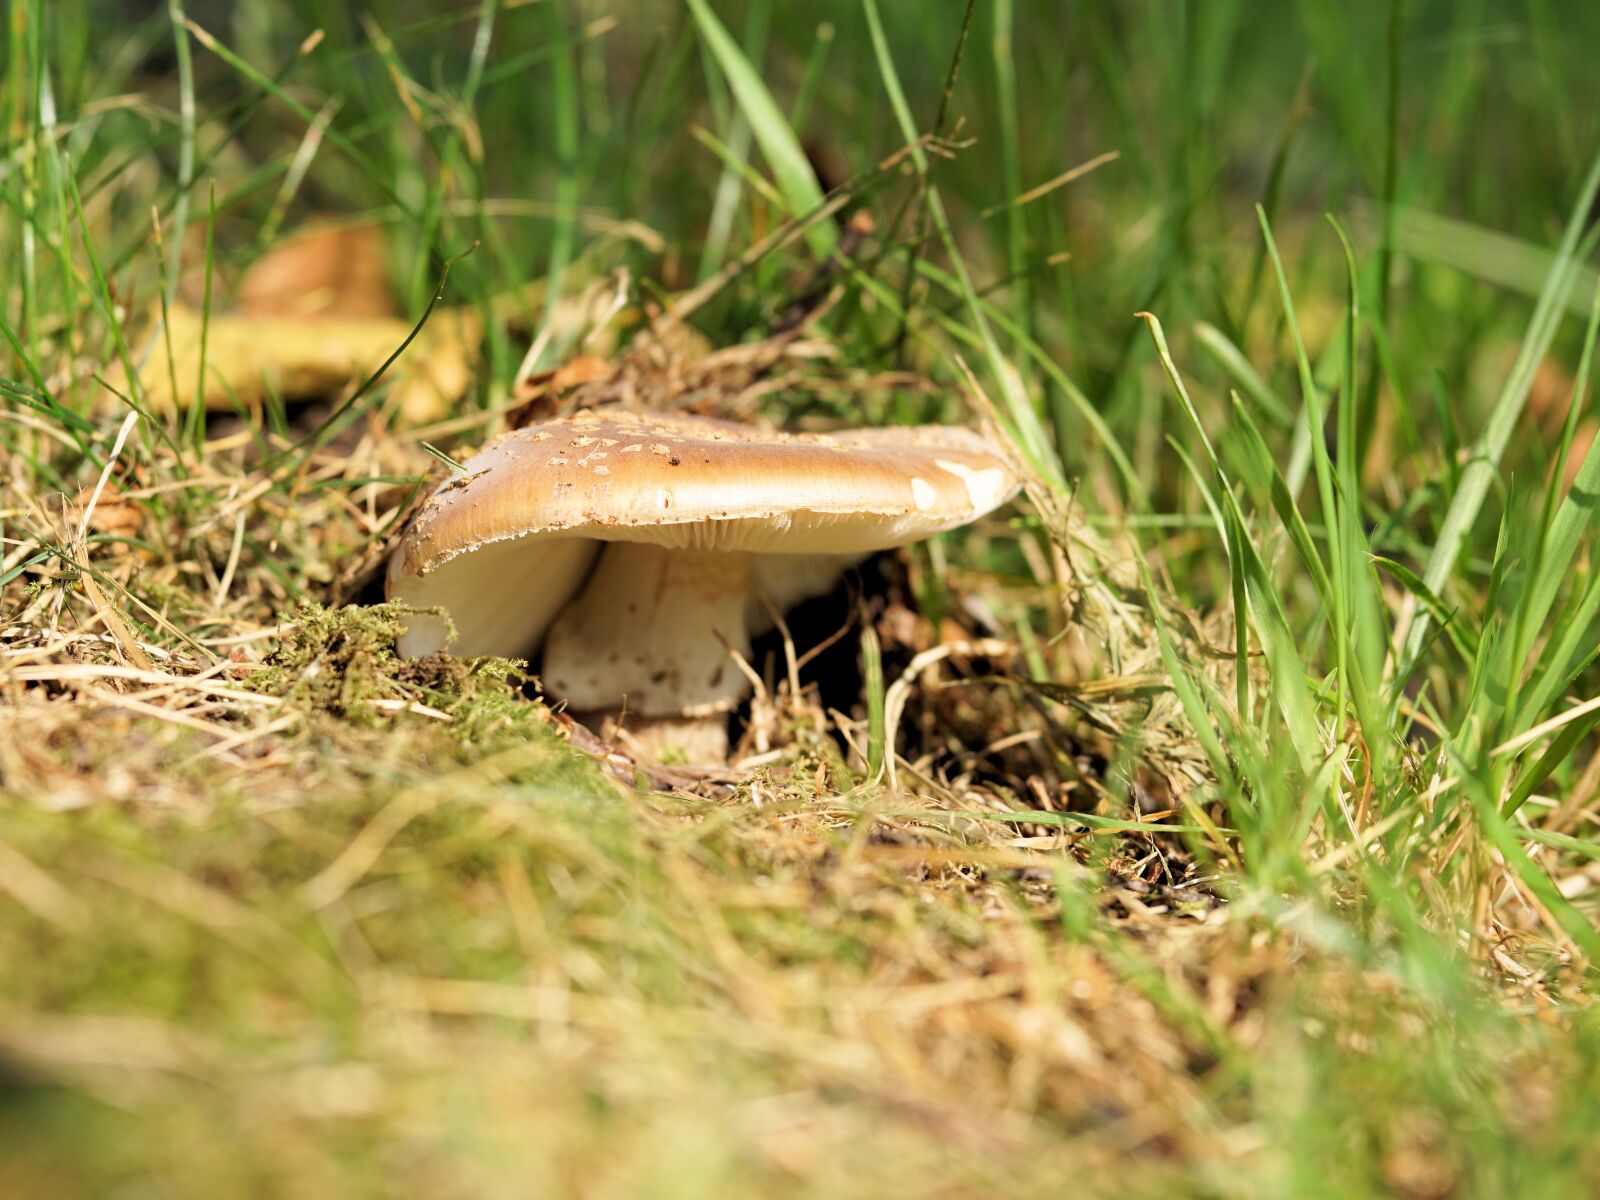 Sony a6000 + E 60mm F2.8 sample photo. Mushroom, forest, nature photography